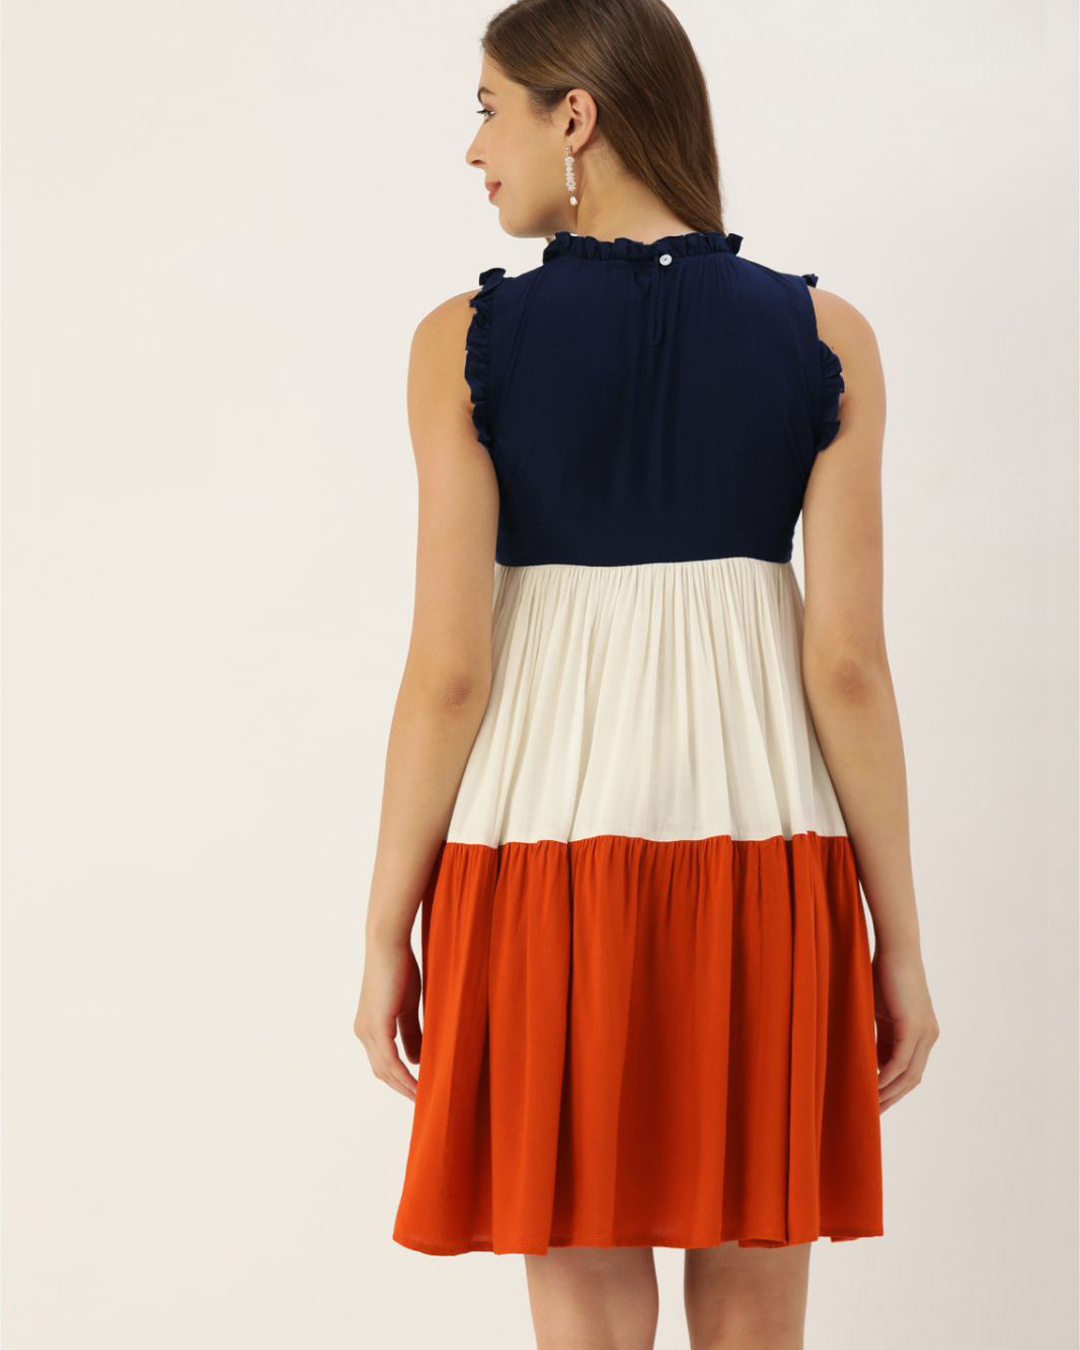 Shop Womennavy Blue And White Colourblocked Woven A Line Tiered Dress-Back